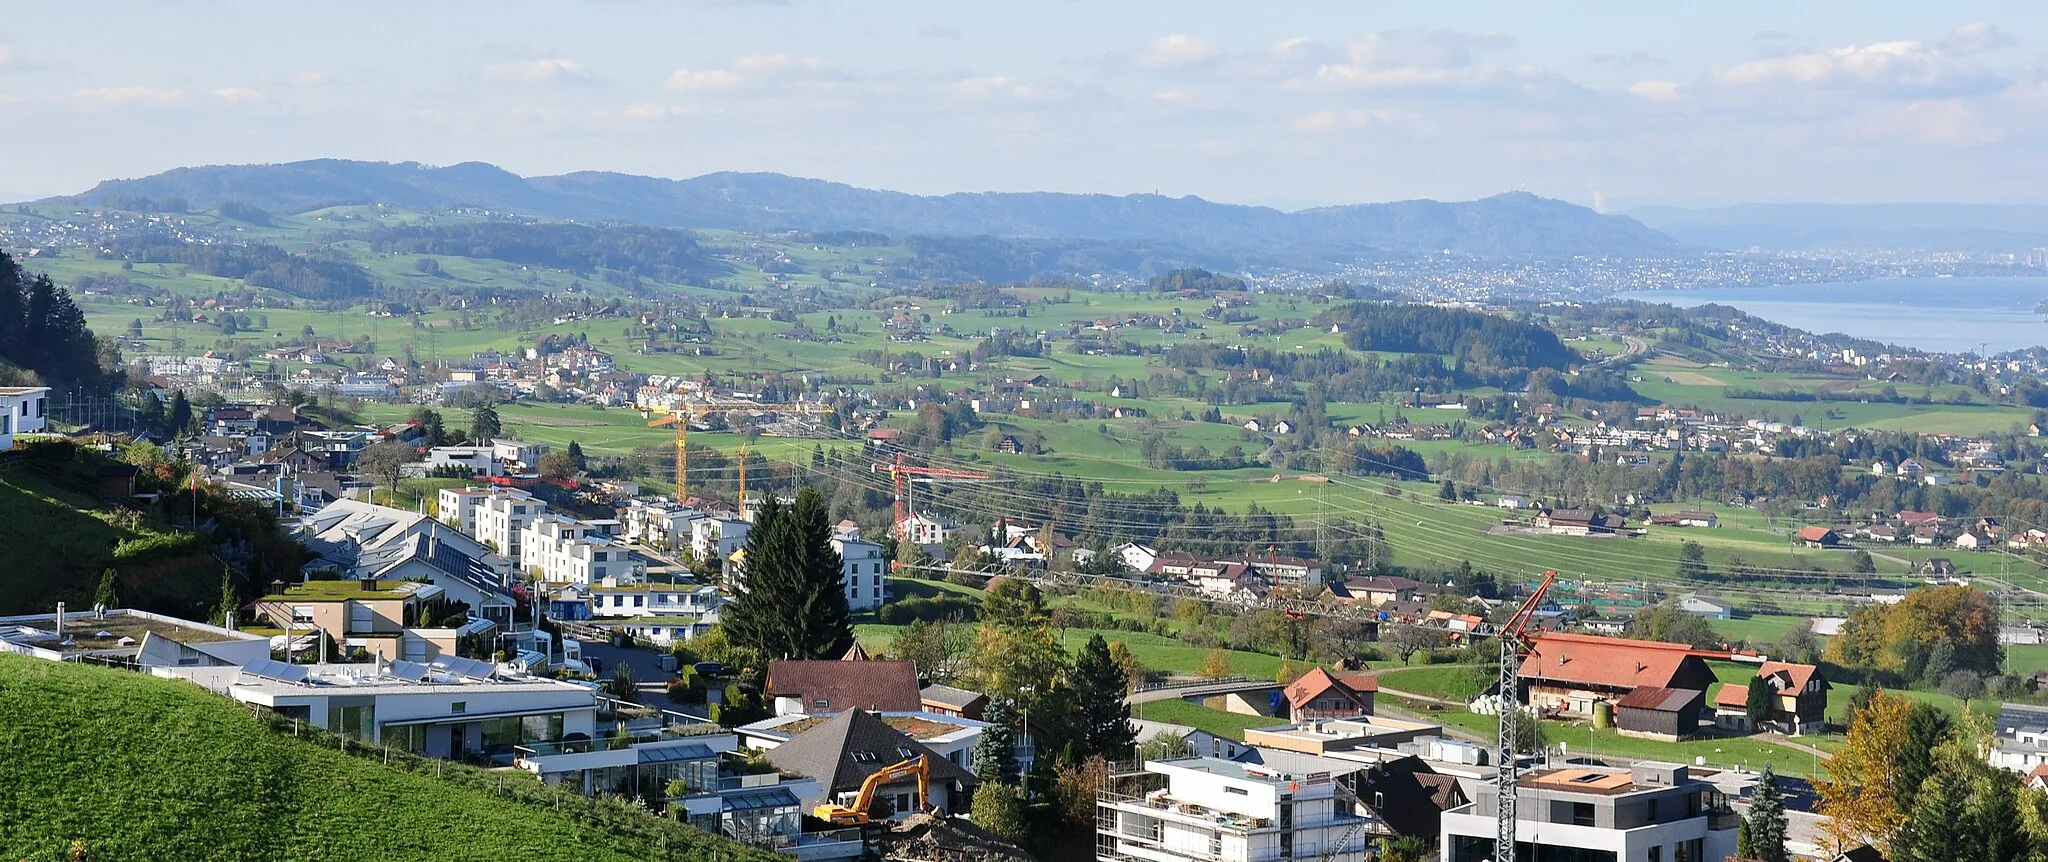 Photo showing: Samstagern and Zimmerberg plateau, as seen from Schindellegi respectively Feusisberg (Switzerland) towards Etzel mountain, Albis chain with (from the left) Felsenegg and Uetliberg mountain and Zürichsee, Zürich in the background to the right.